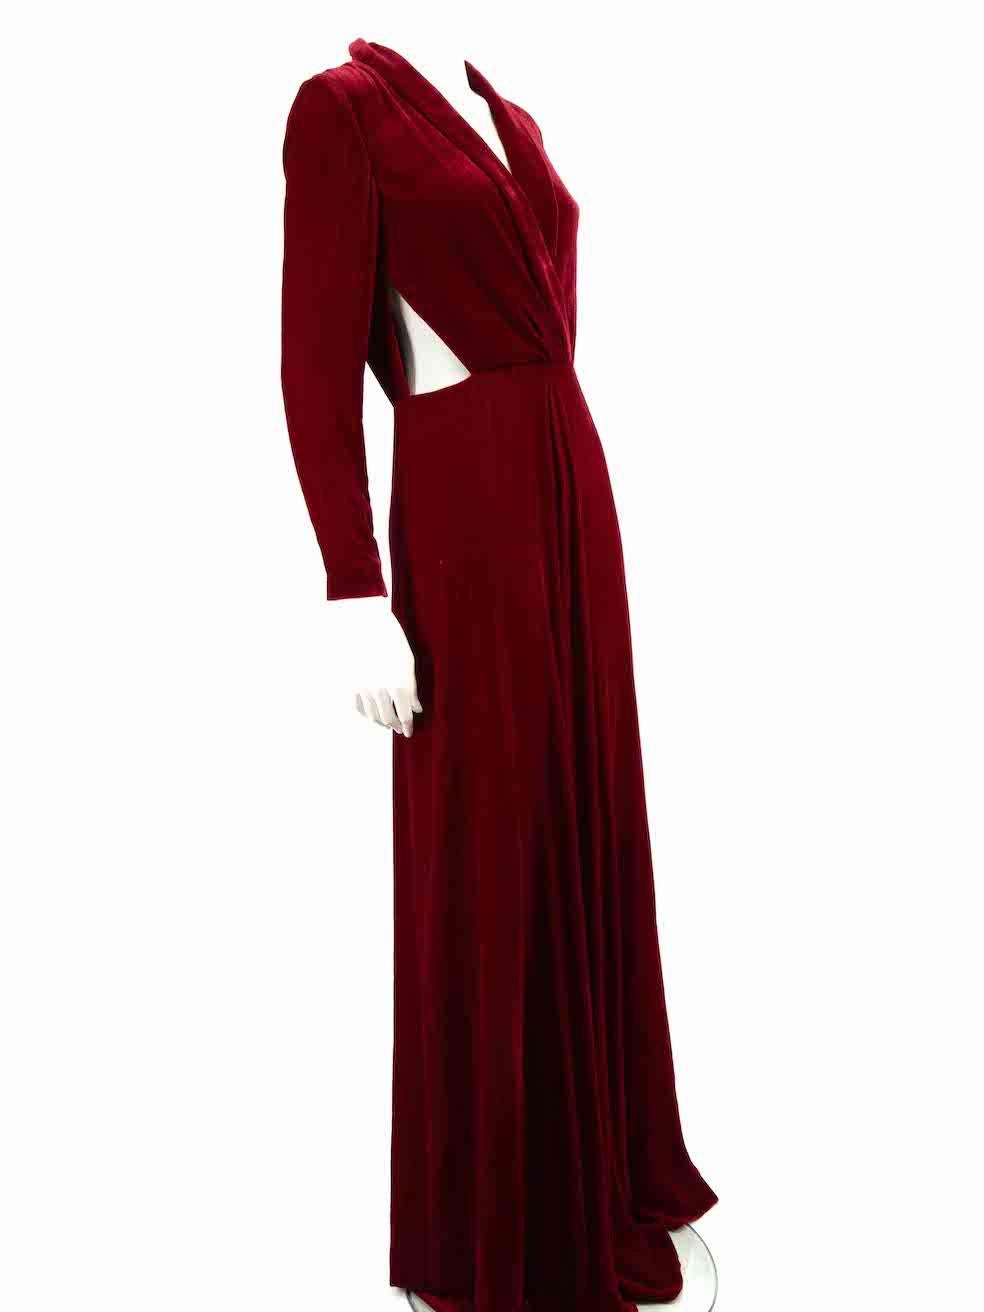 CONDITION is Never worn, with tags. No visible wear to jumpsuit is evident on this new Honayda designer resale item.
 
 
 
 Details
 
 
 Red
 
 Velvet
 
 Jumpsuit
 
 Long sleeves
 
 Zipped sleeve cuffs
 
 Plunge neck
 
 Side cut out detail
 
 Very